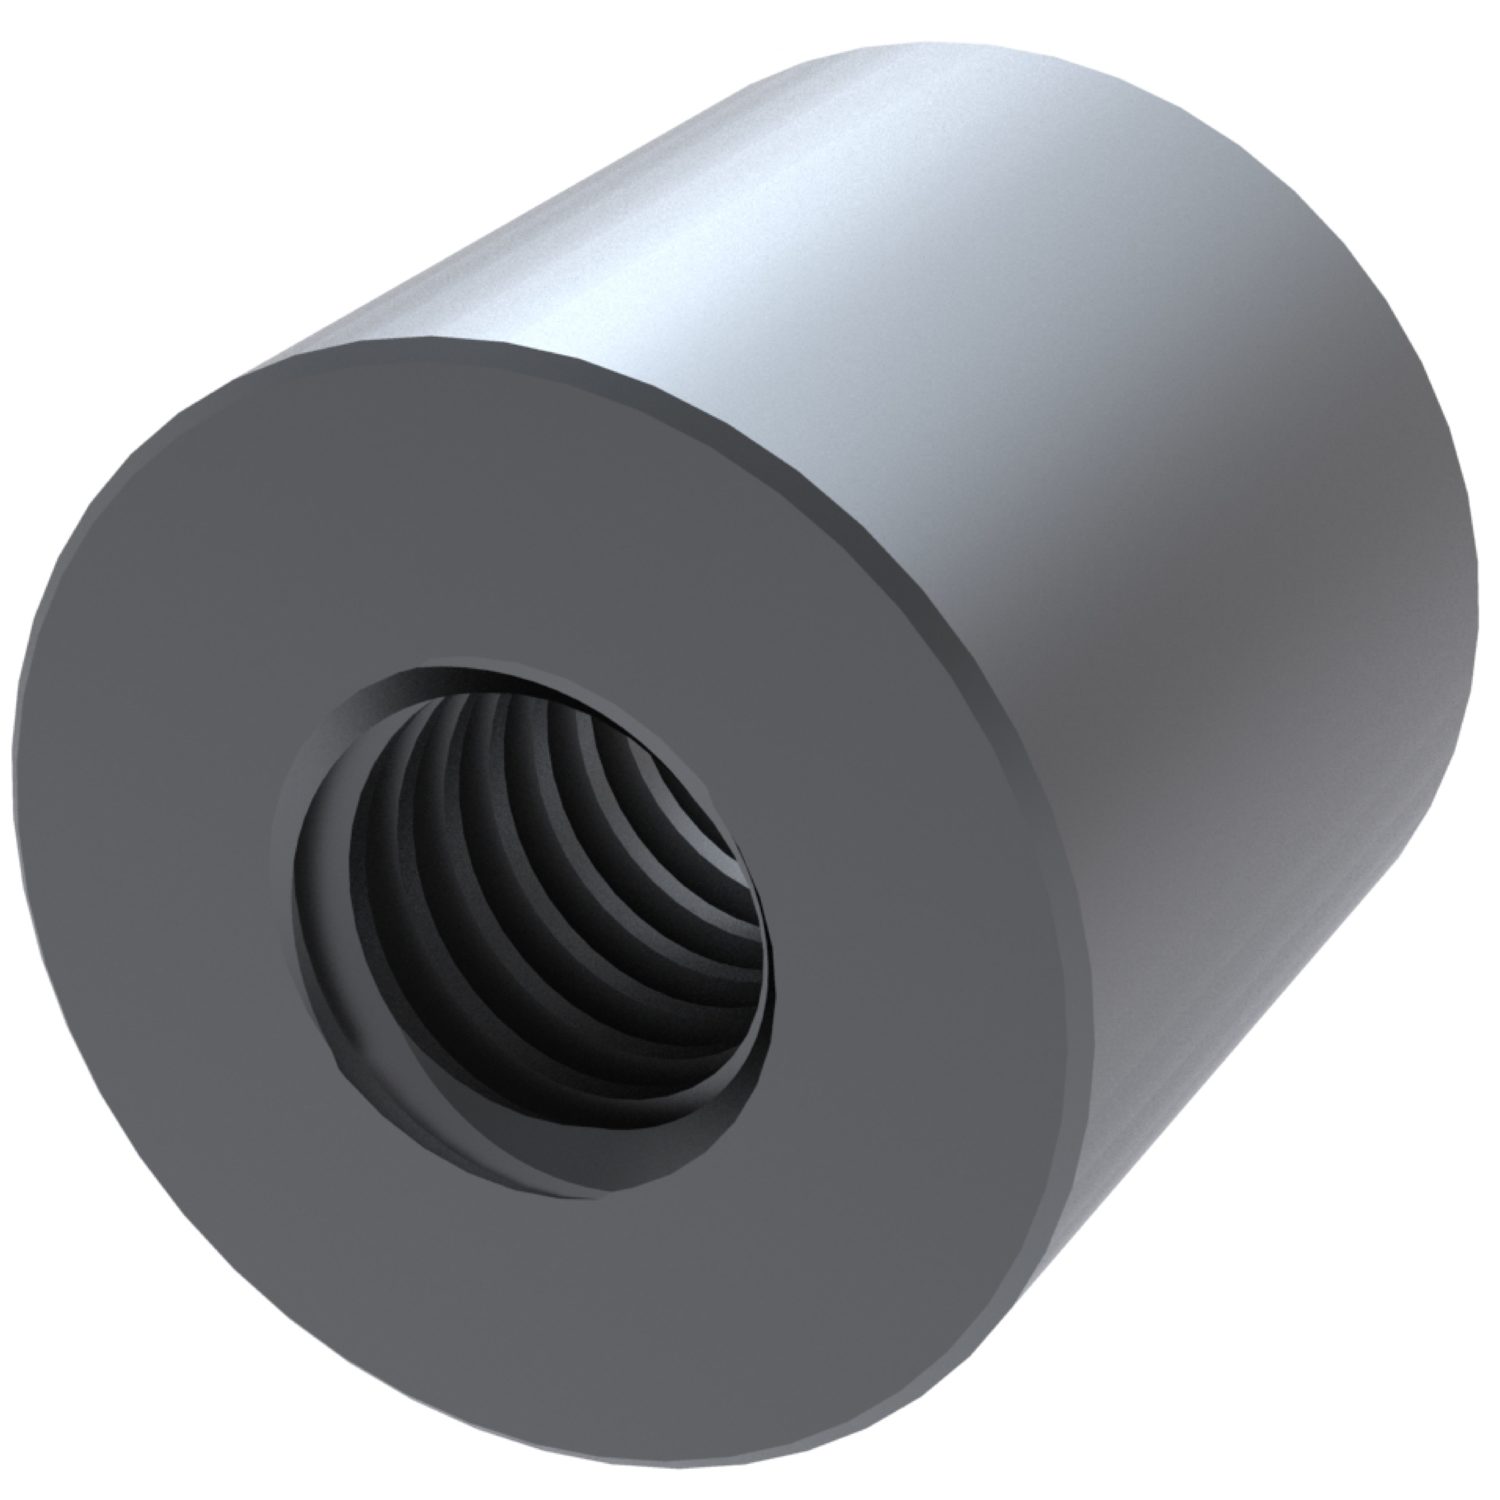 Long Cylindrical Steel Nuts Manufactured to ISO 2901/2903 (DIN 103). Used for clamping and locking applications, and for slow rotational speeds with manual control; steel-to-steel contact surface is not suitable for motorised motion.